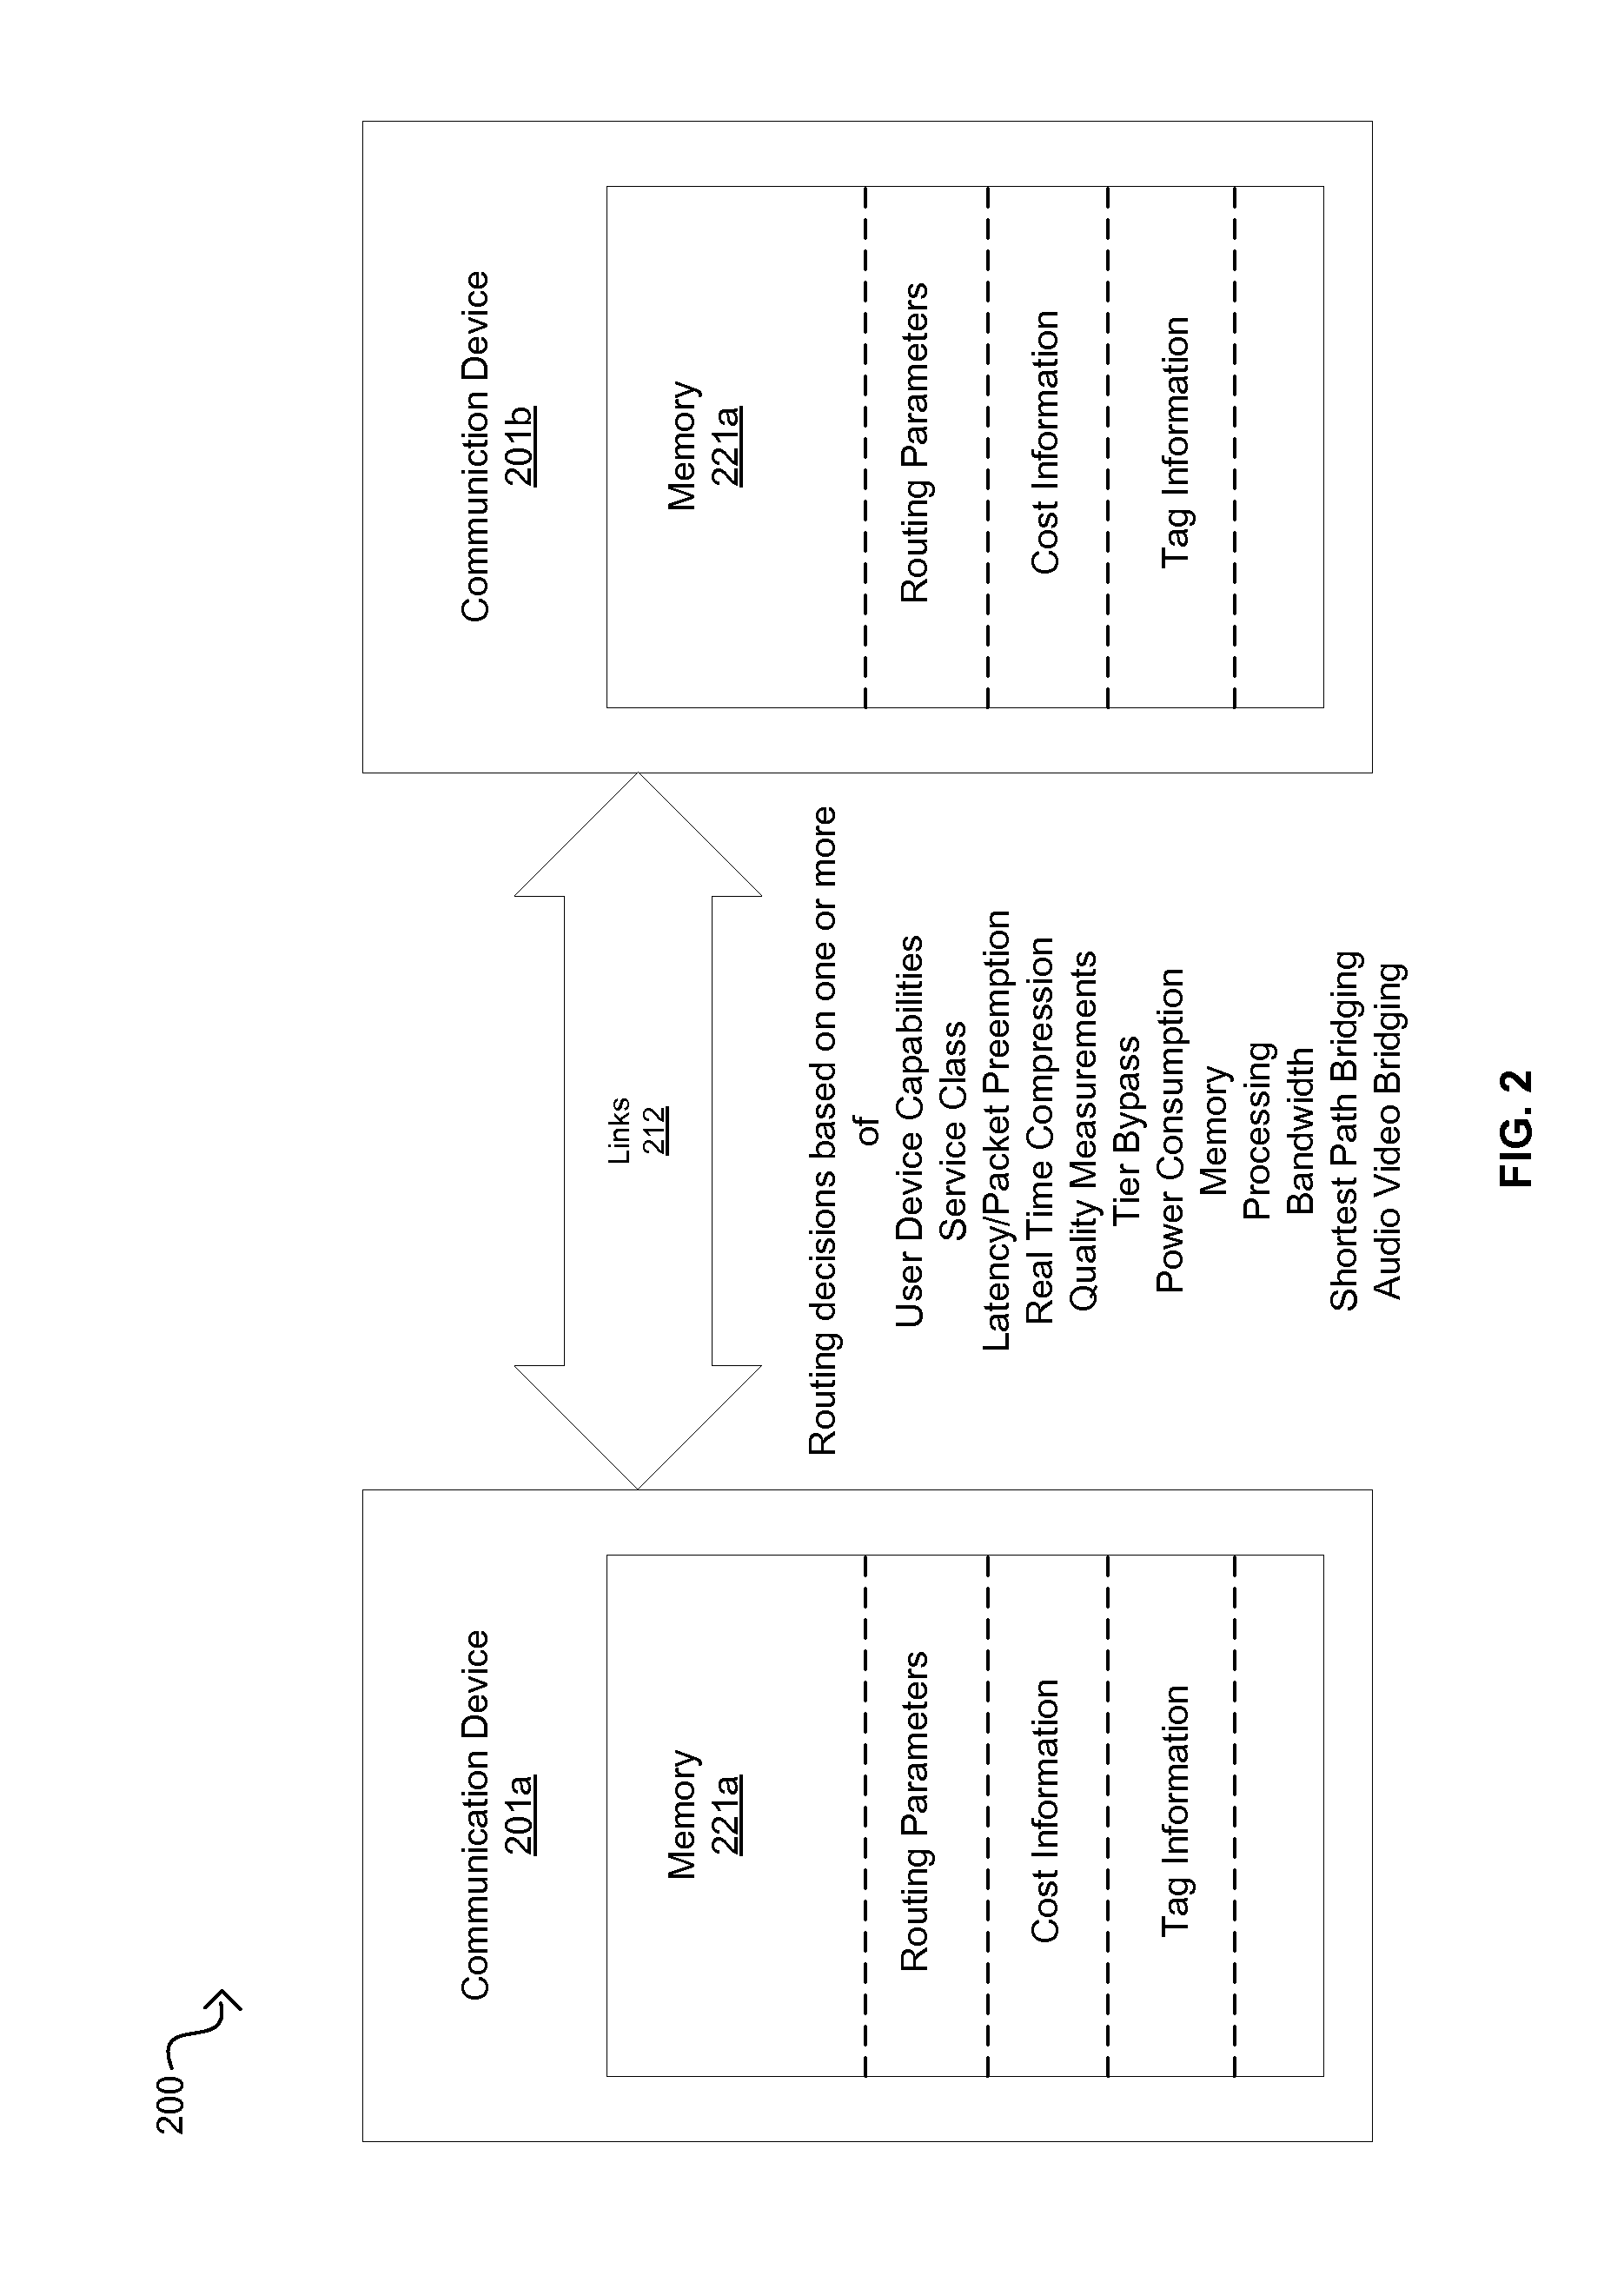 Method And System For Dynamic Routing And/Or Switching In A Network